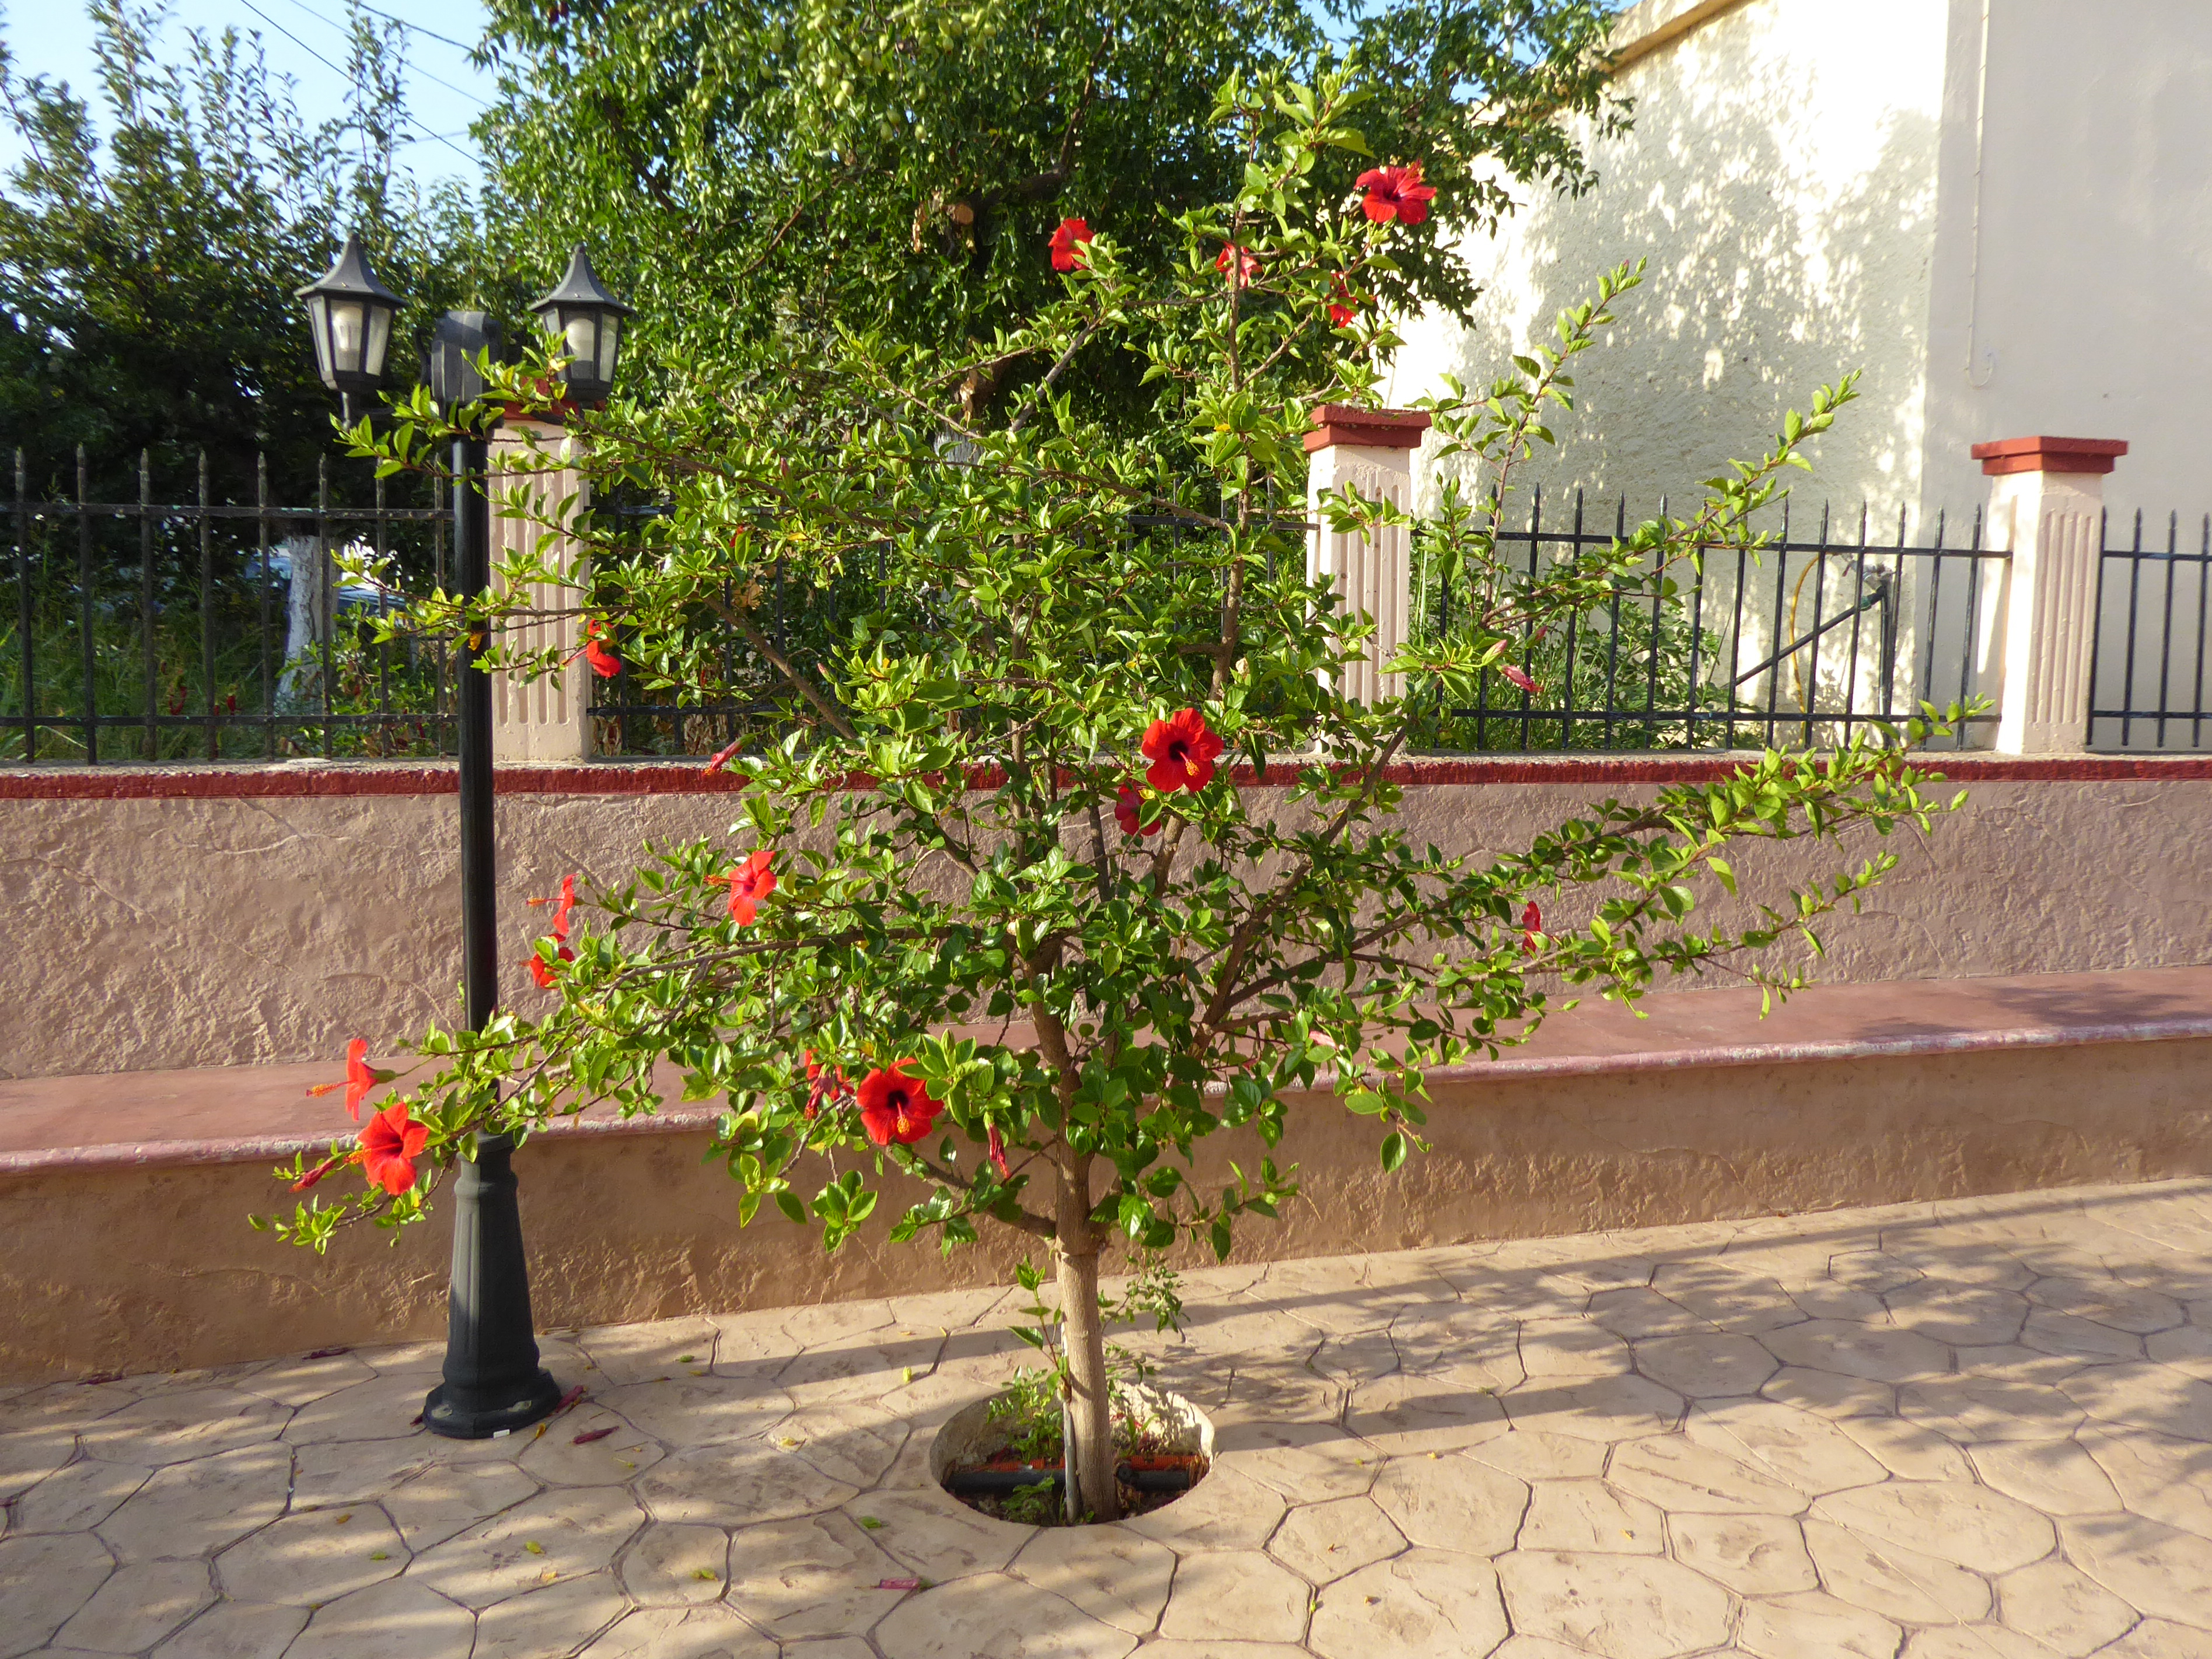 A Hibiscus rosa-sinensis tree, about 8 feet high with a dozen red flowers